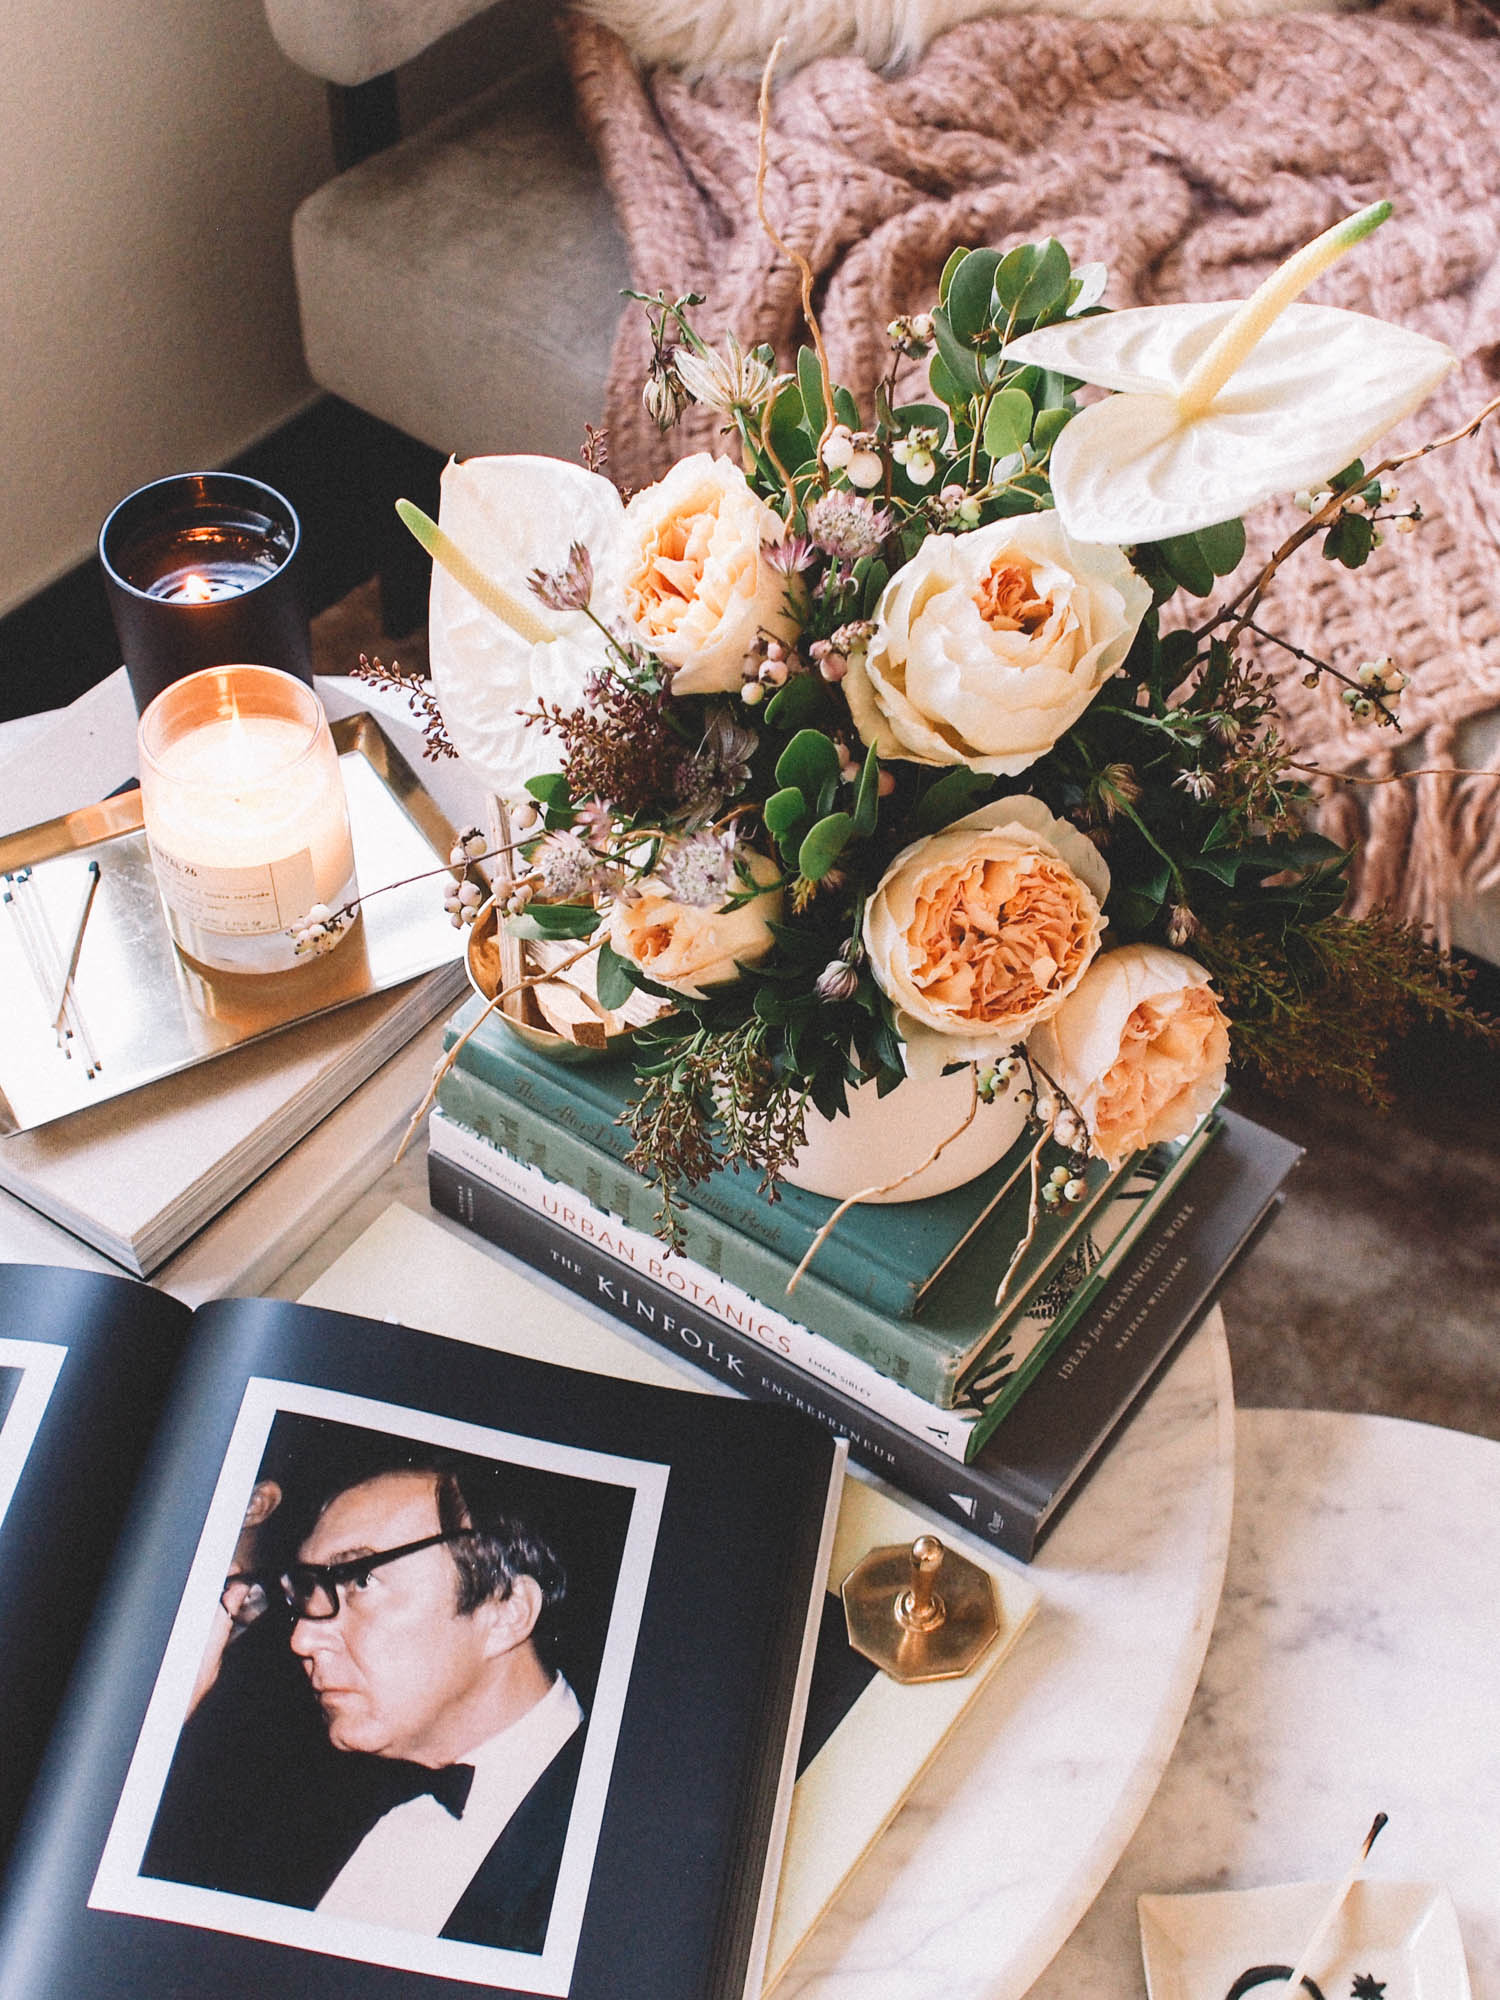 How to Style Coffee Table Books